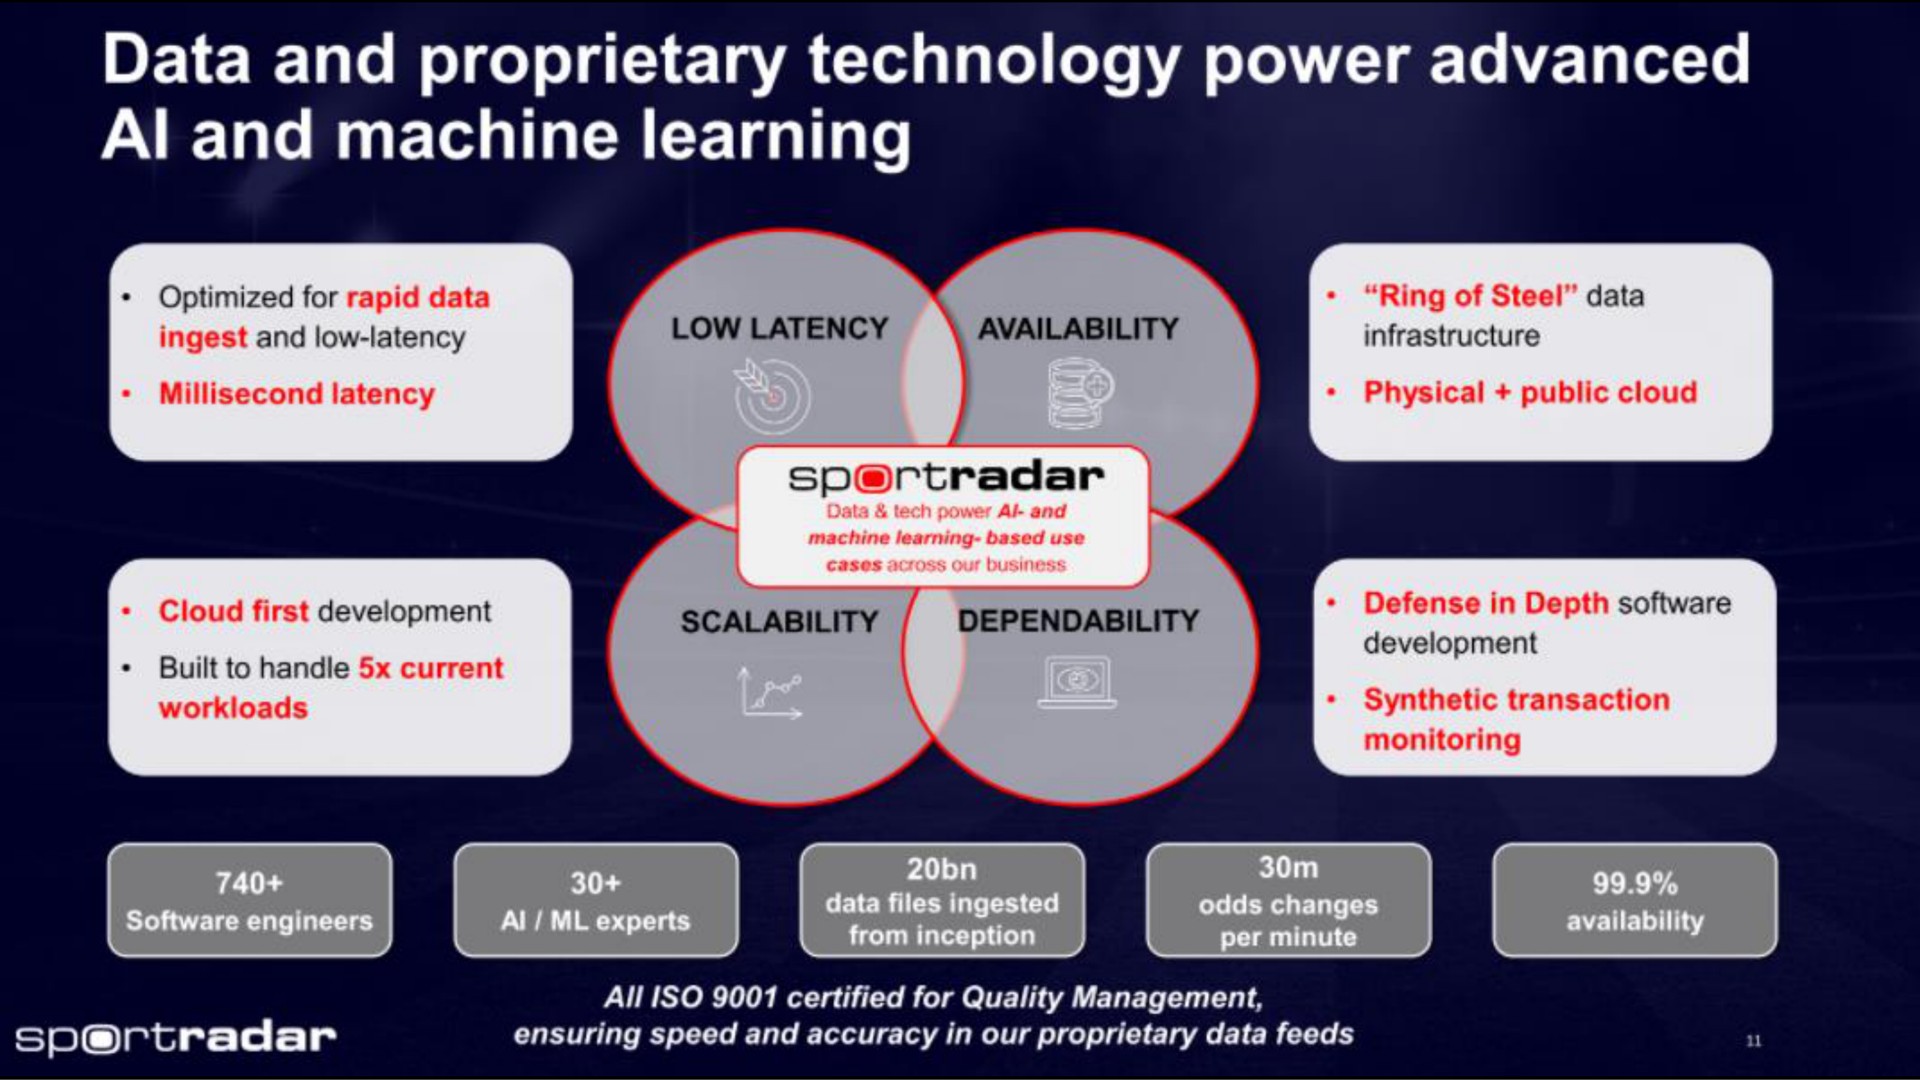 data and proprietary technology power advanced and machine learning | Sportradar